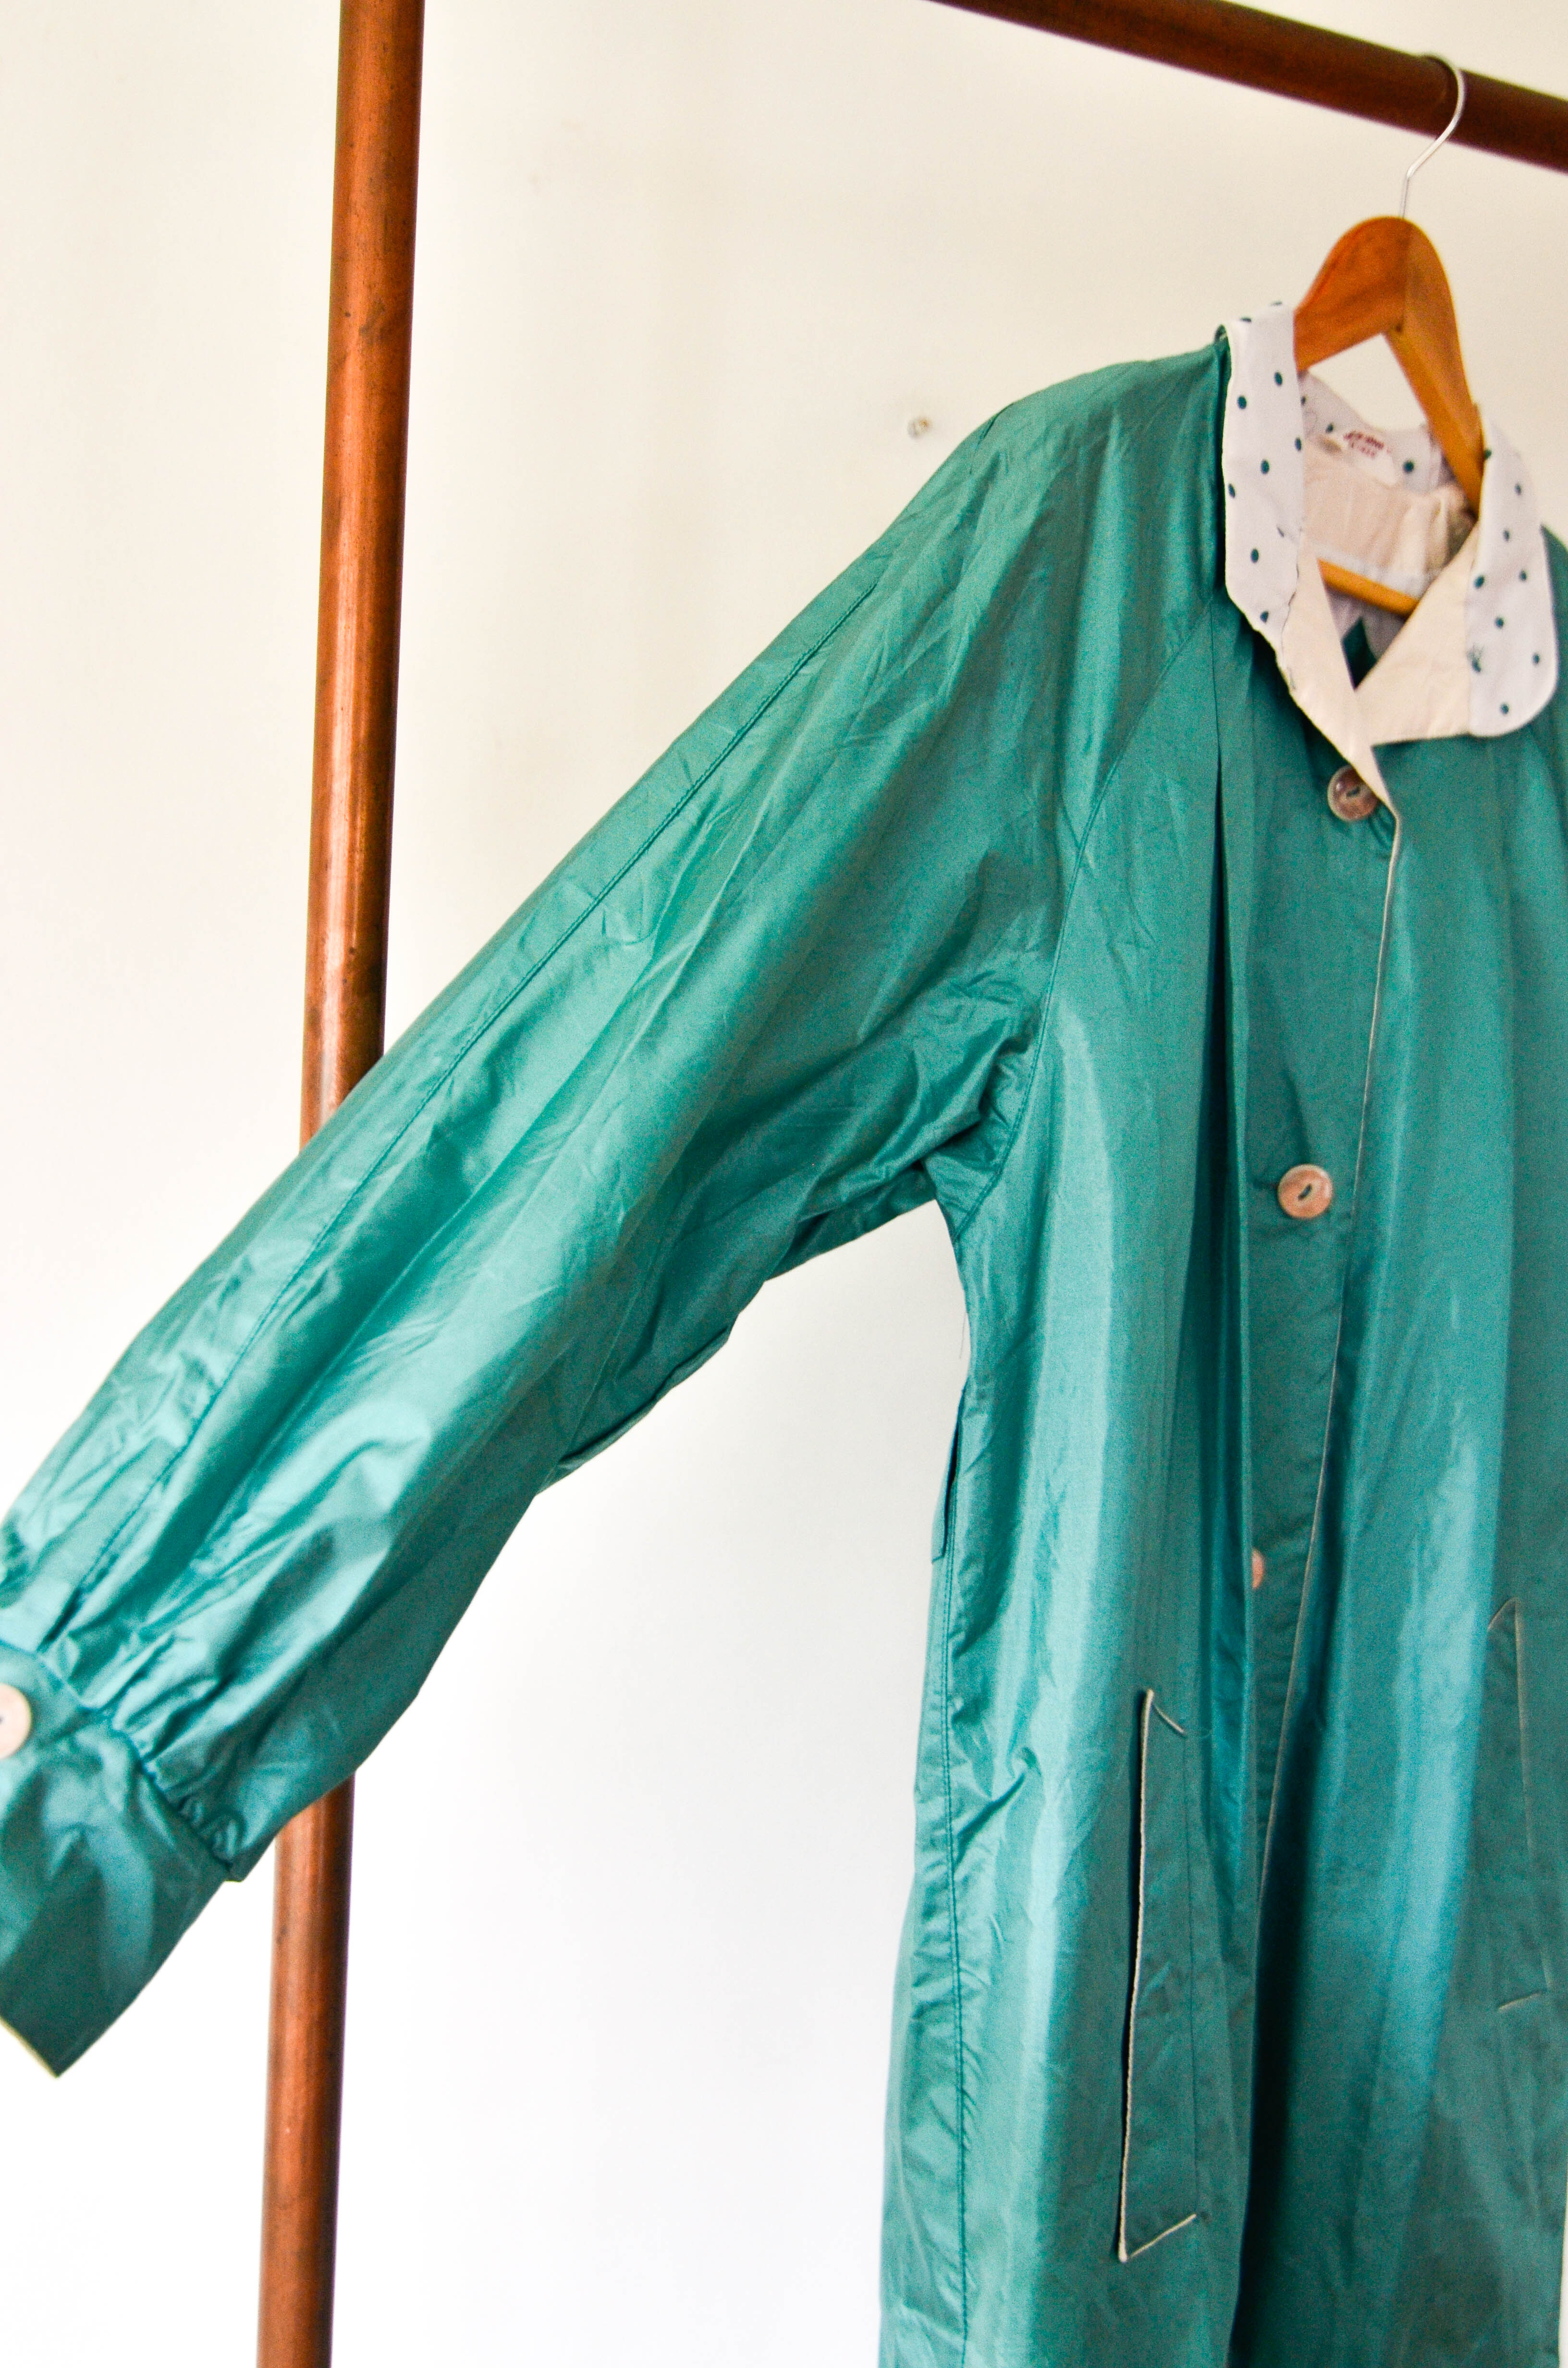 Trench impermeable vintage 80s